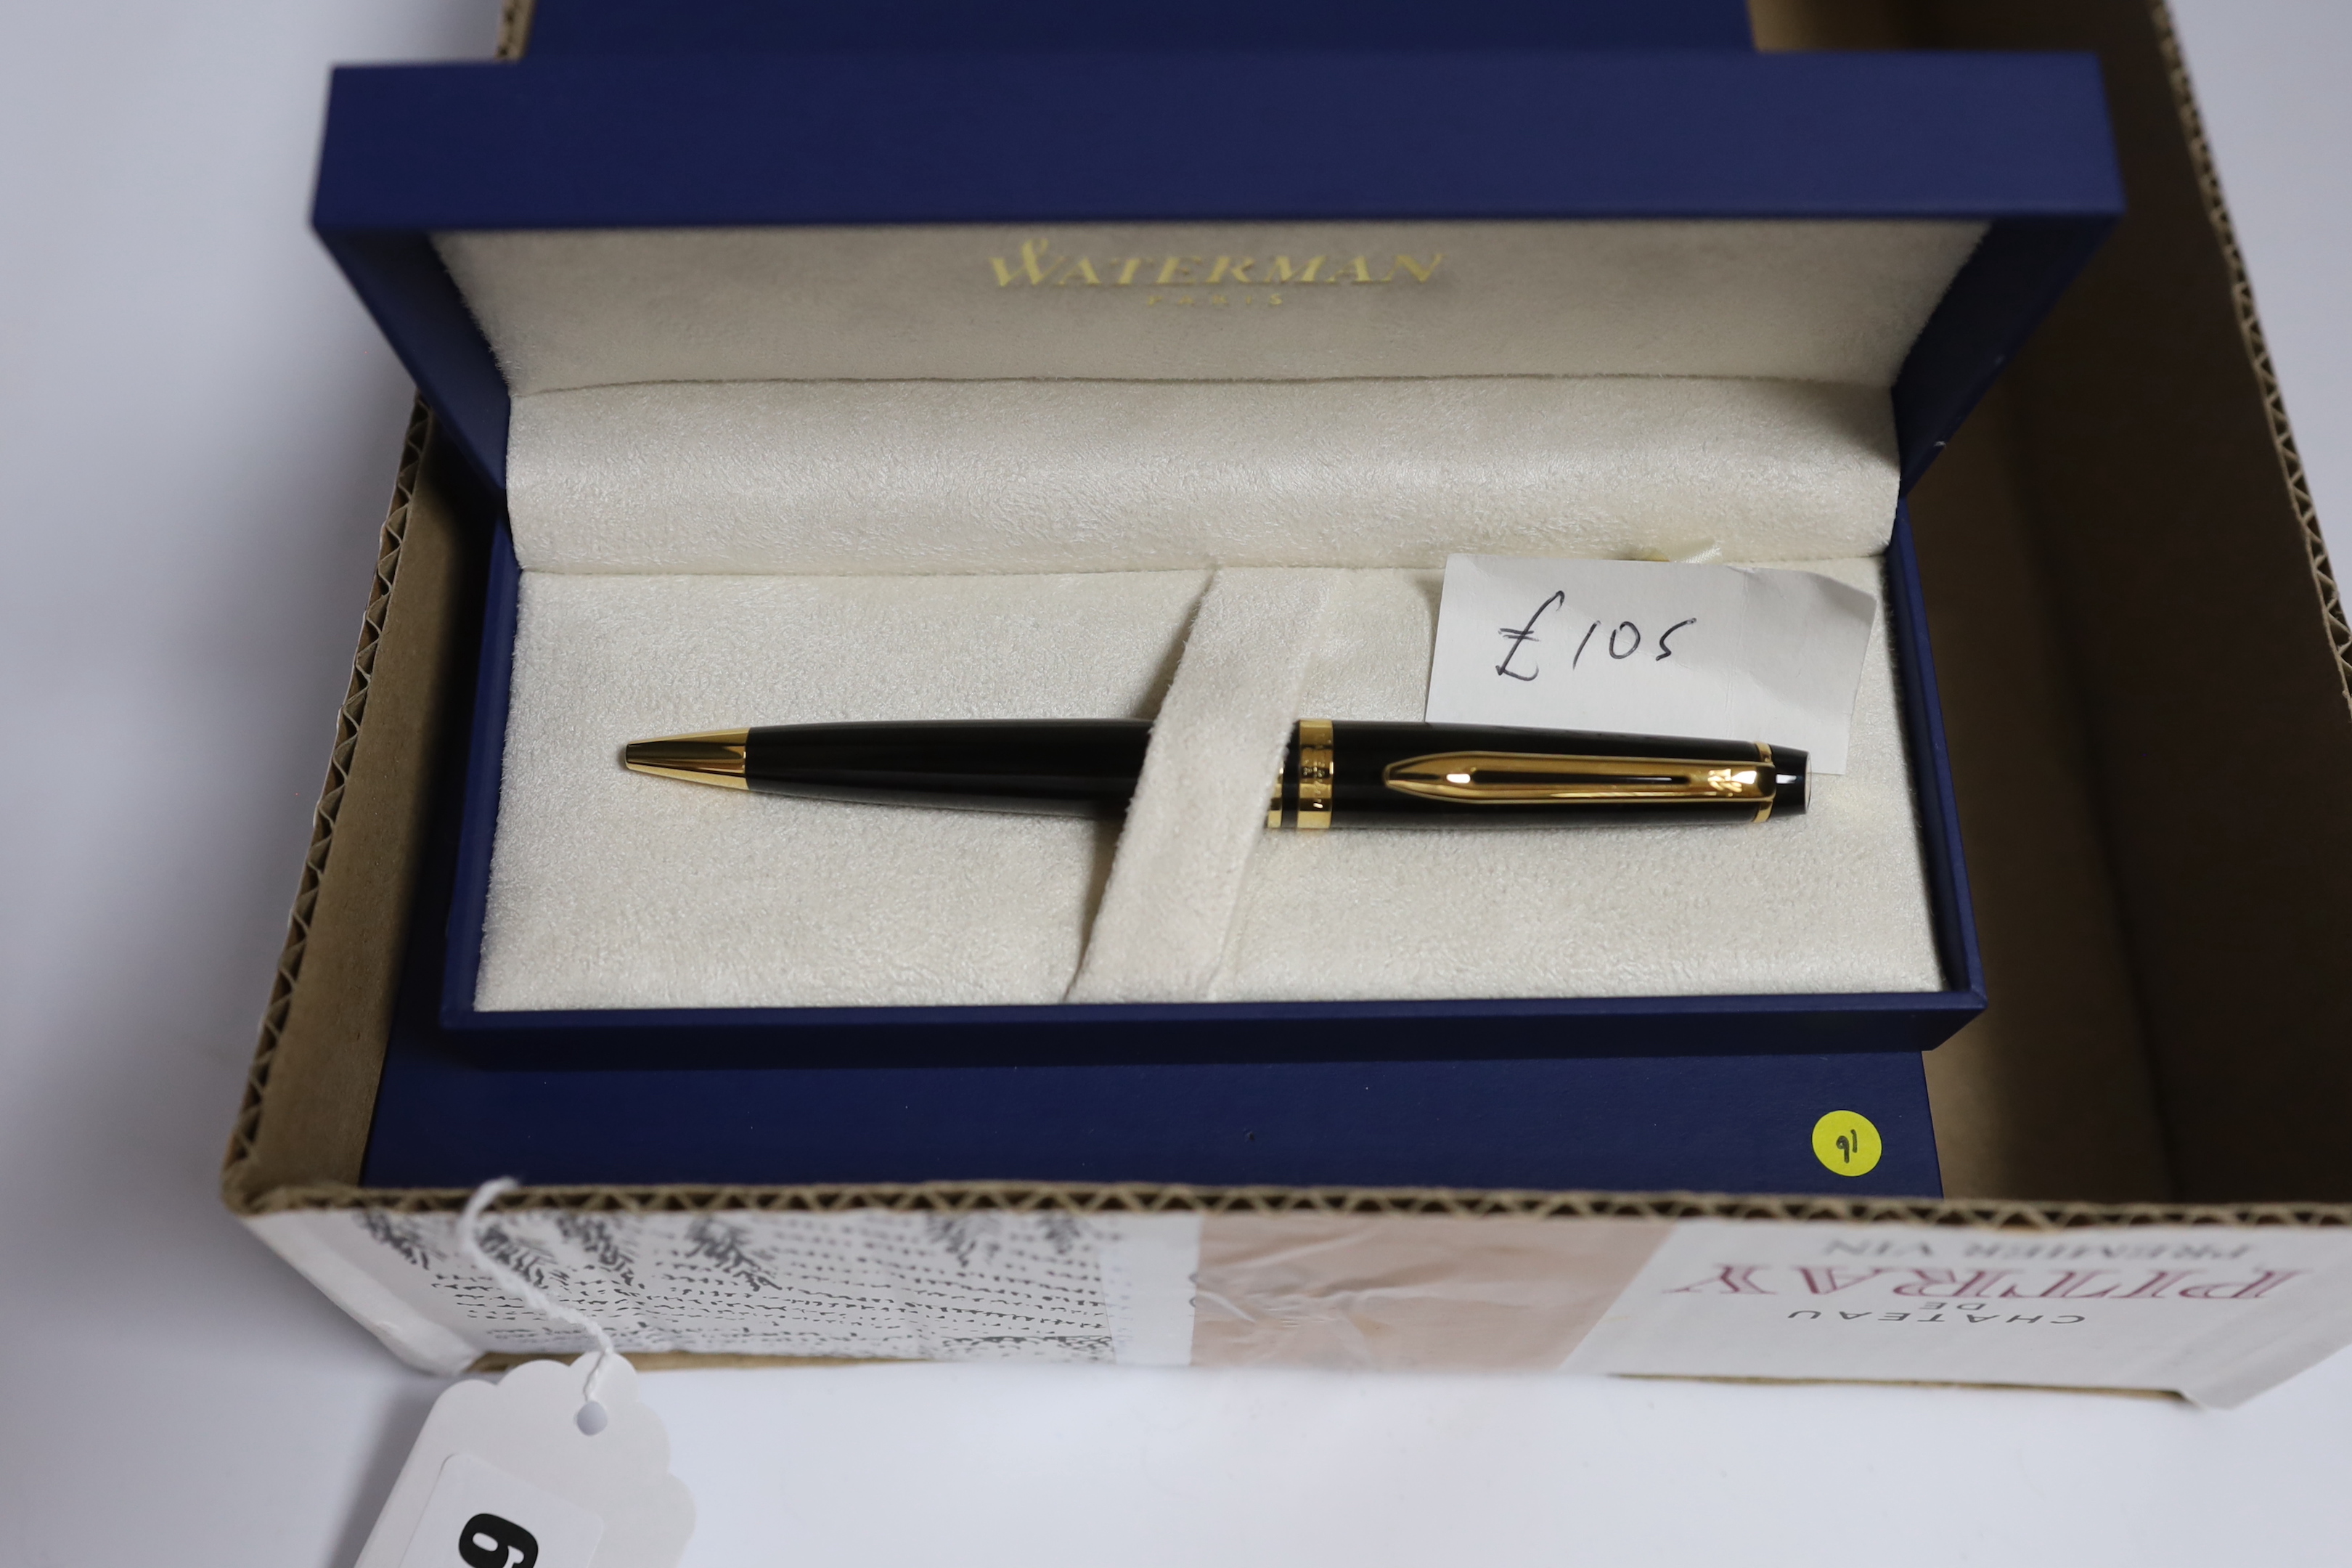 Eight boxed Waterman pens and pencils; an Expert Rollerball pen, a Hemisphere propelling pencil, two Expert Ballpoint pens, two Exception Ballpoint pens, an Expert Propelling pencil and an Emblem pen